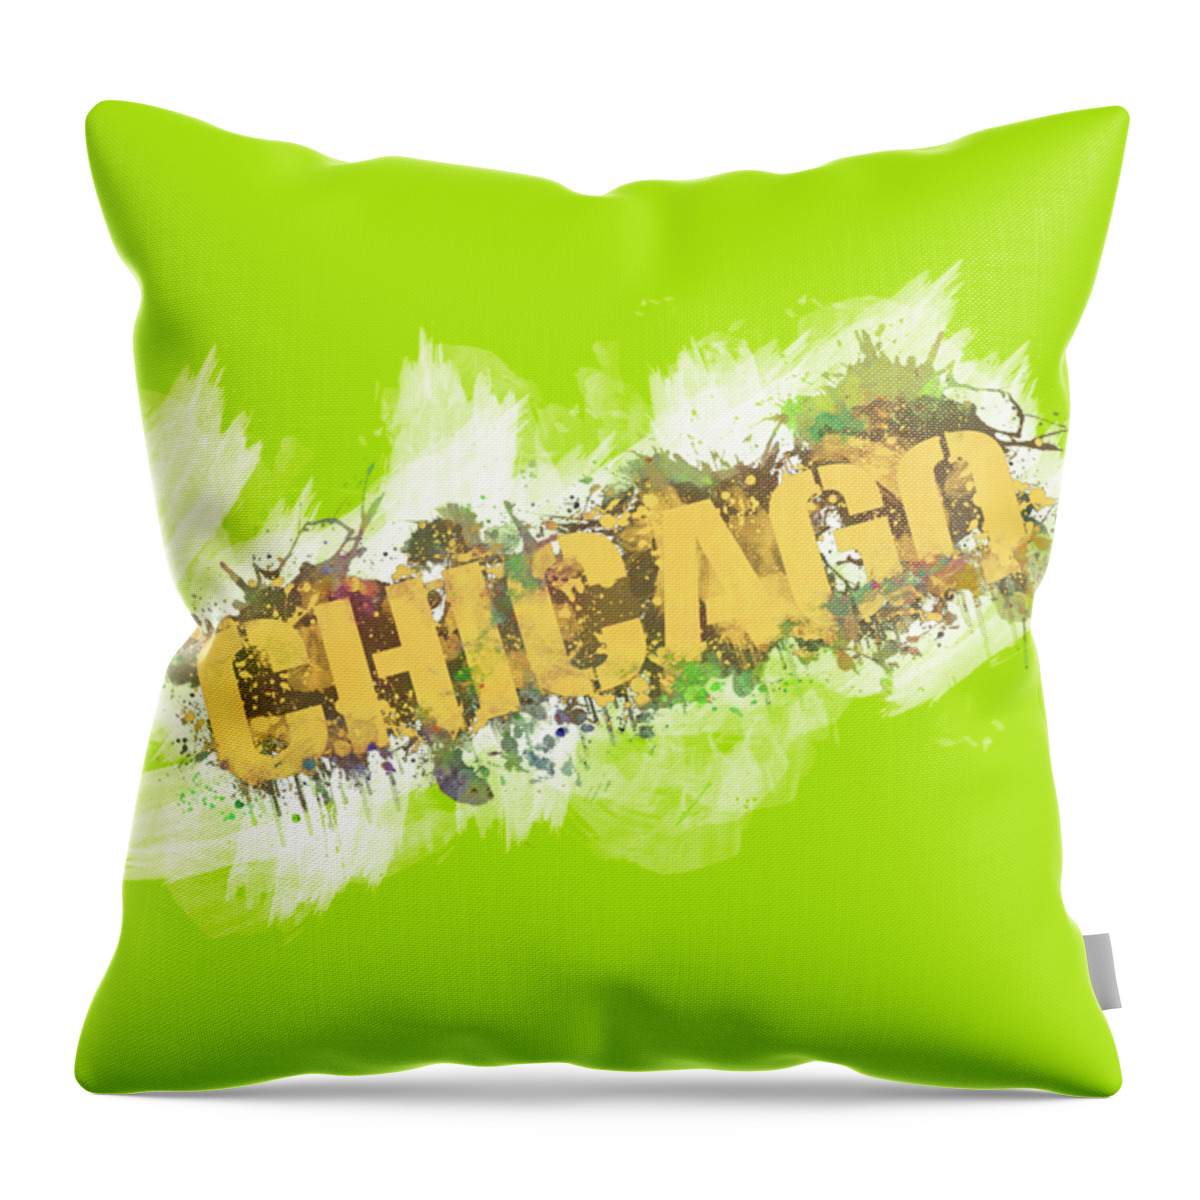 Abstract Chicago Throw Pillow featuring the painting Abstract Chicago Design - Illinois USA by Stefano Senise